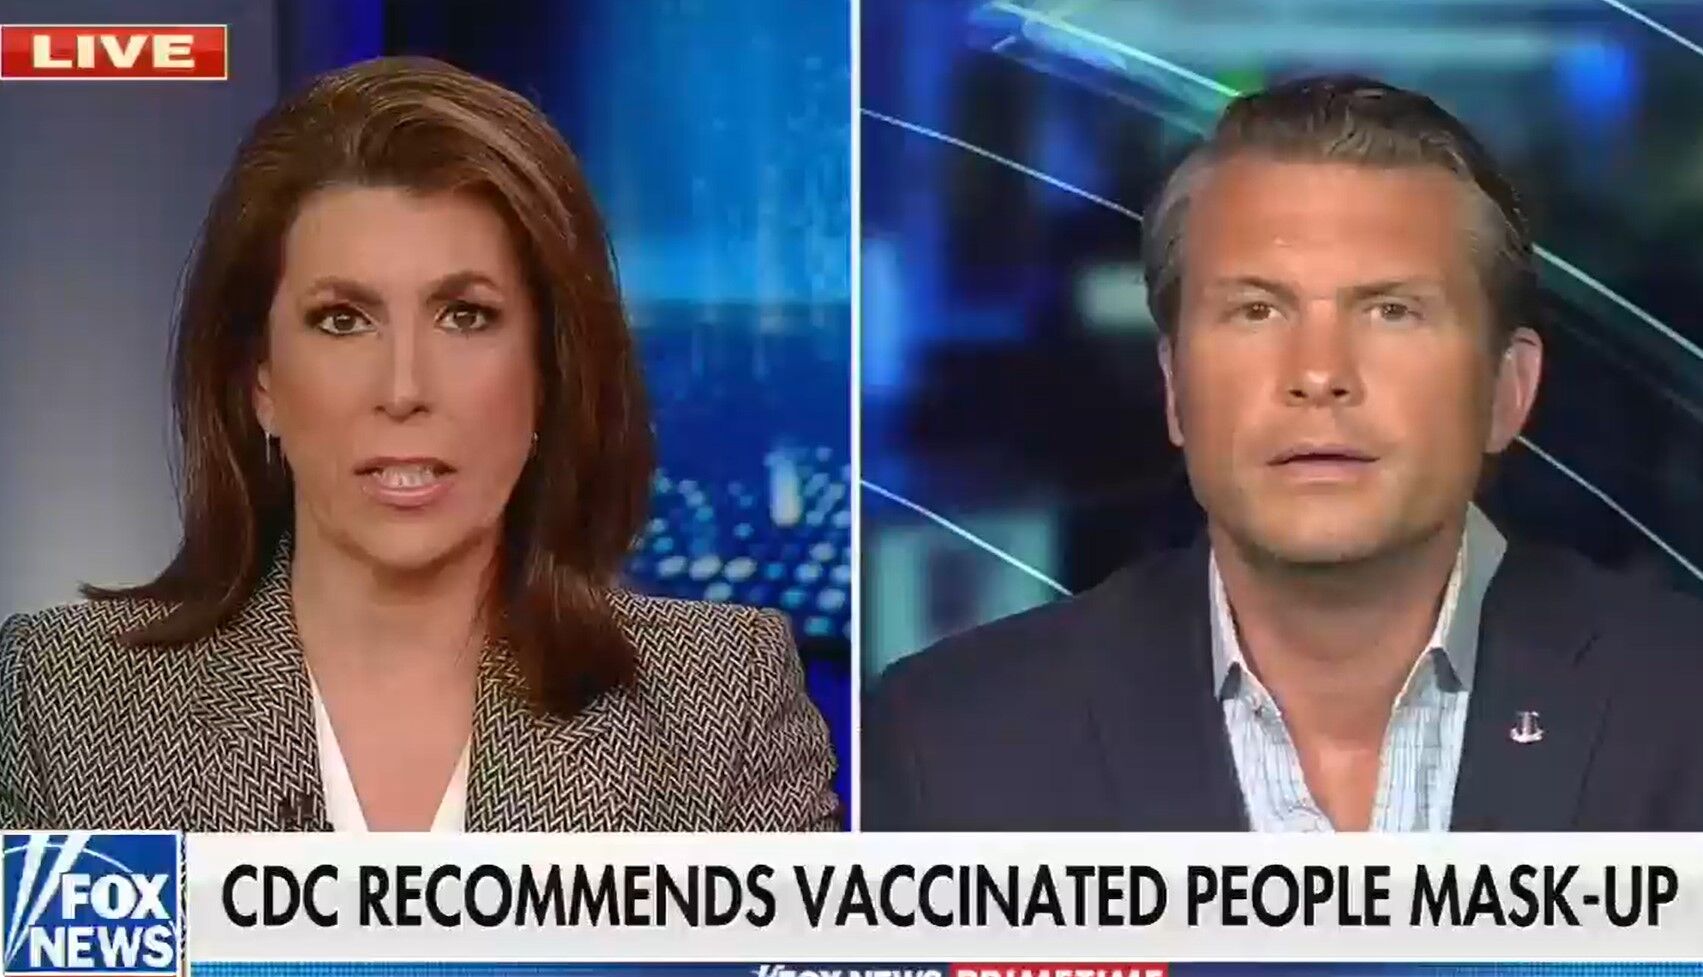 Tammy Bruce and Paul Hegseth talk about how bad masks and vaccines are, wondering why COVID transmissions are on the rise.